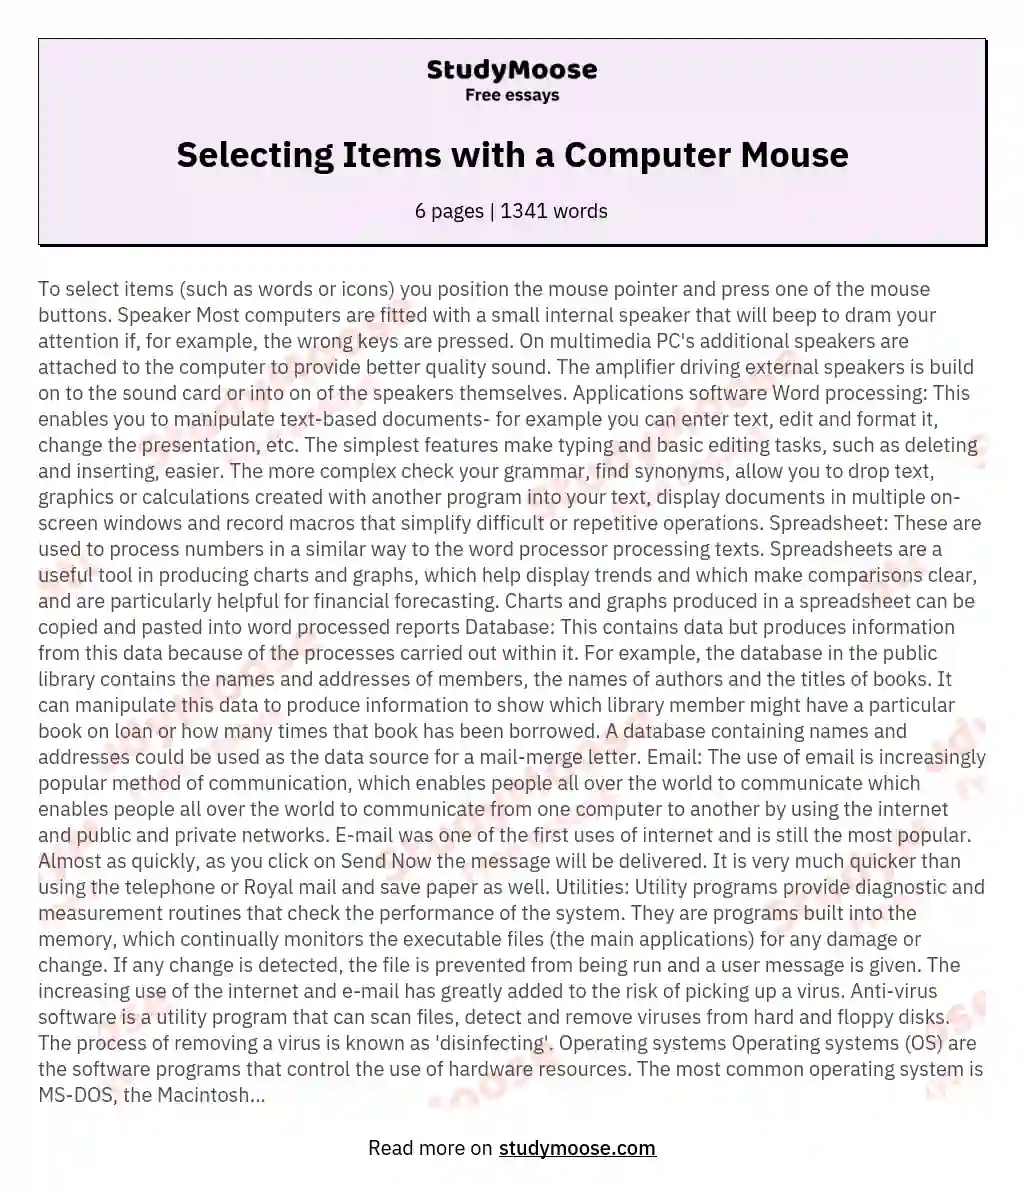 Selecting Items with a Computer Mouse essay